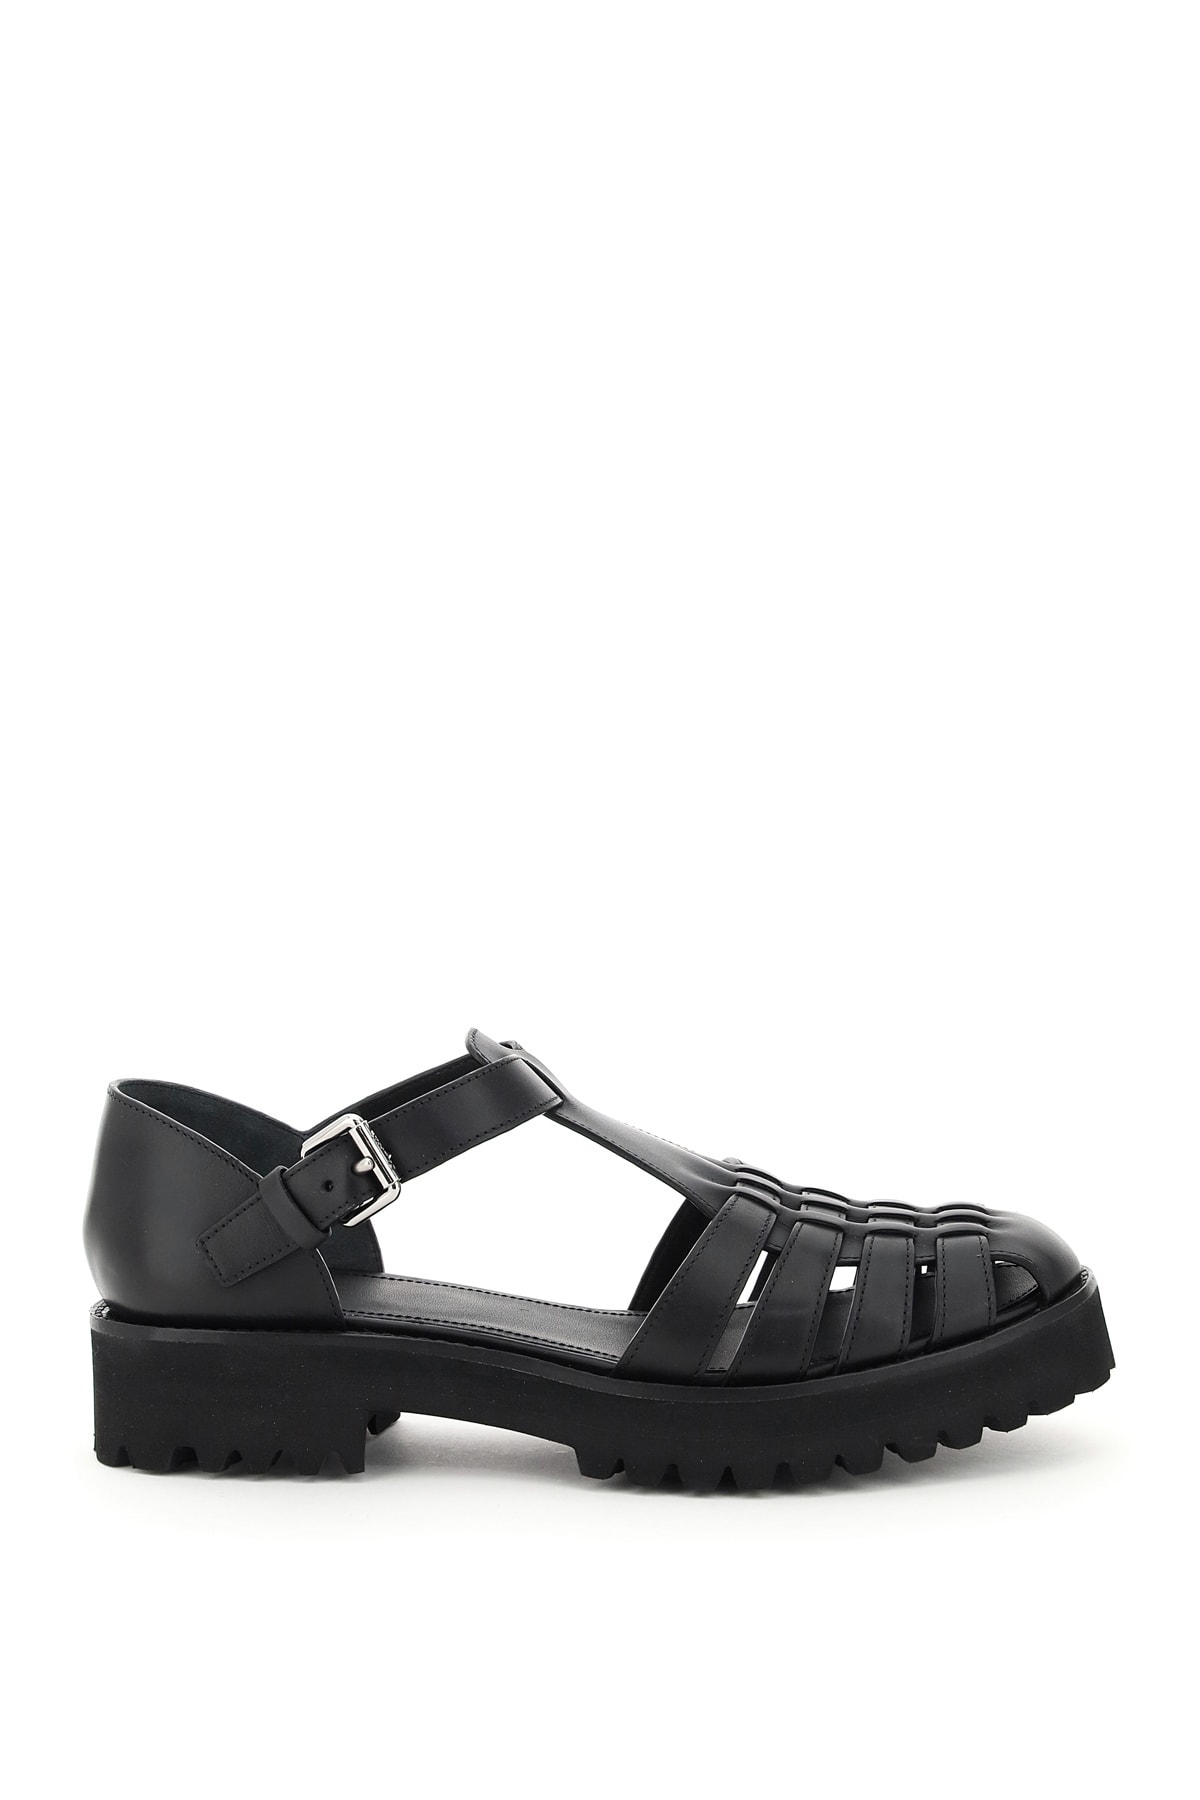 Church's KELSEY LEATHER SANDALS